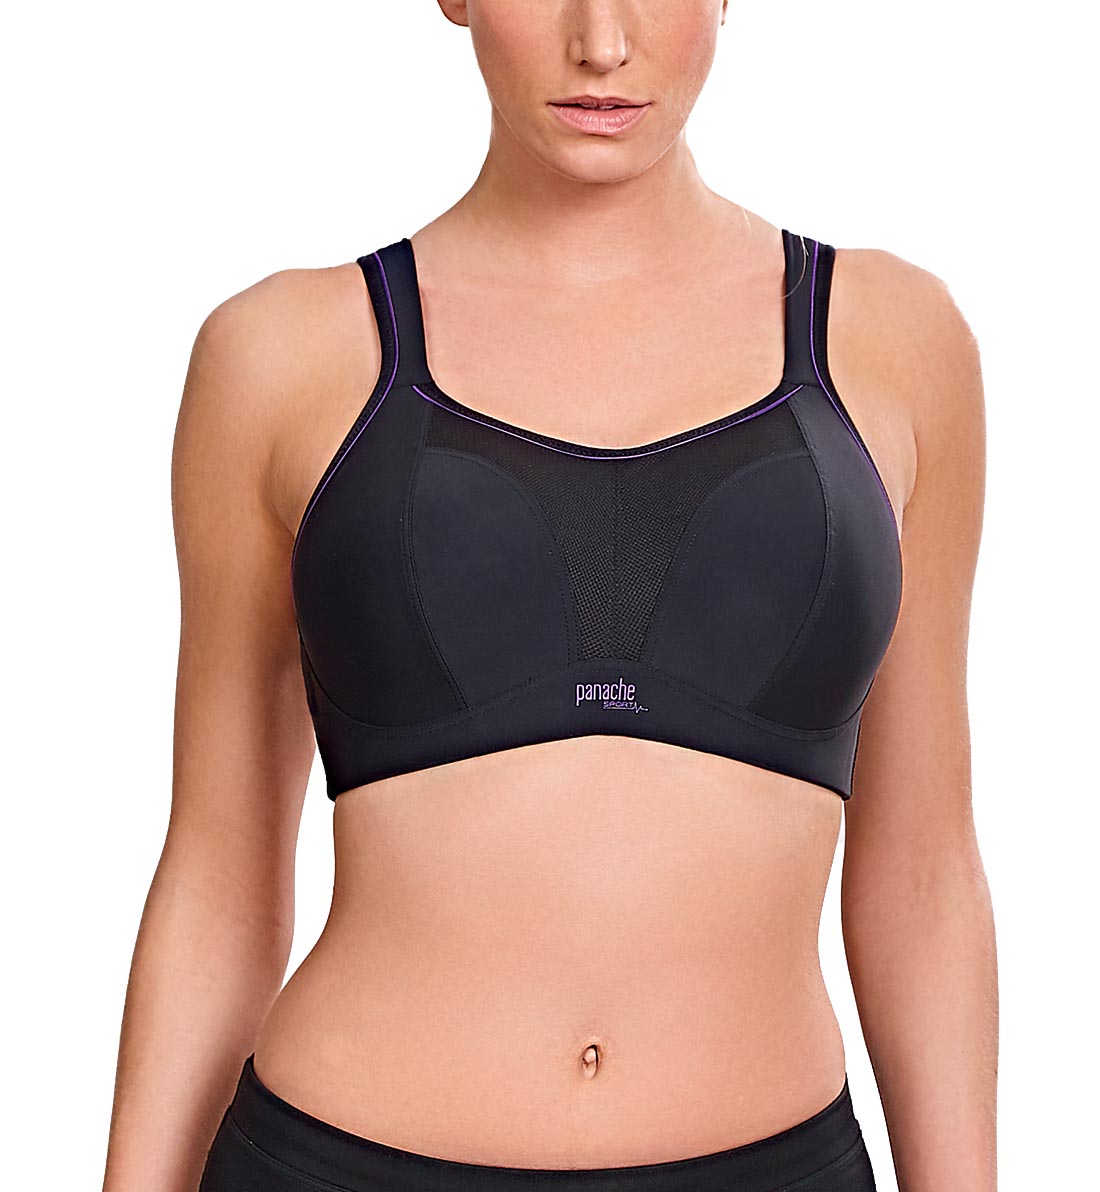 Panache Non-Padded Wired Sports Bra – Lace of Love